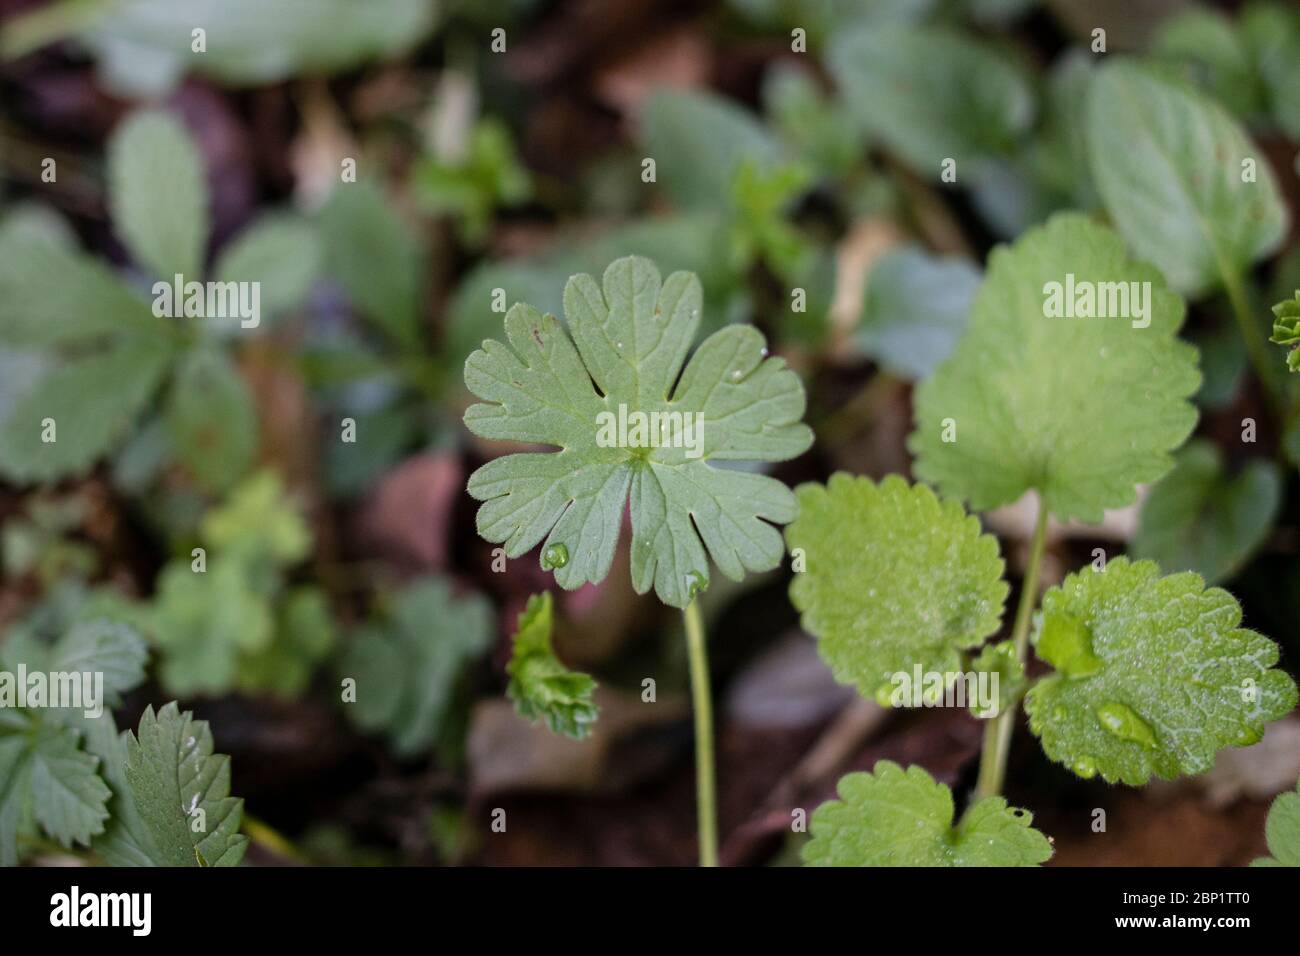 The leaf of the plant, whose Latin name is Geranium lucidum. Close up in green color. Stock Photo